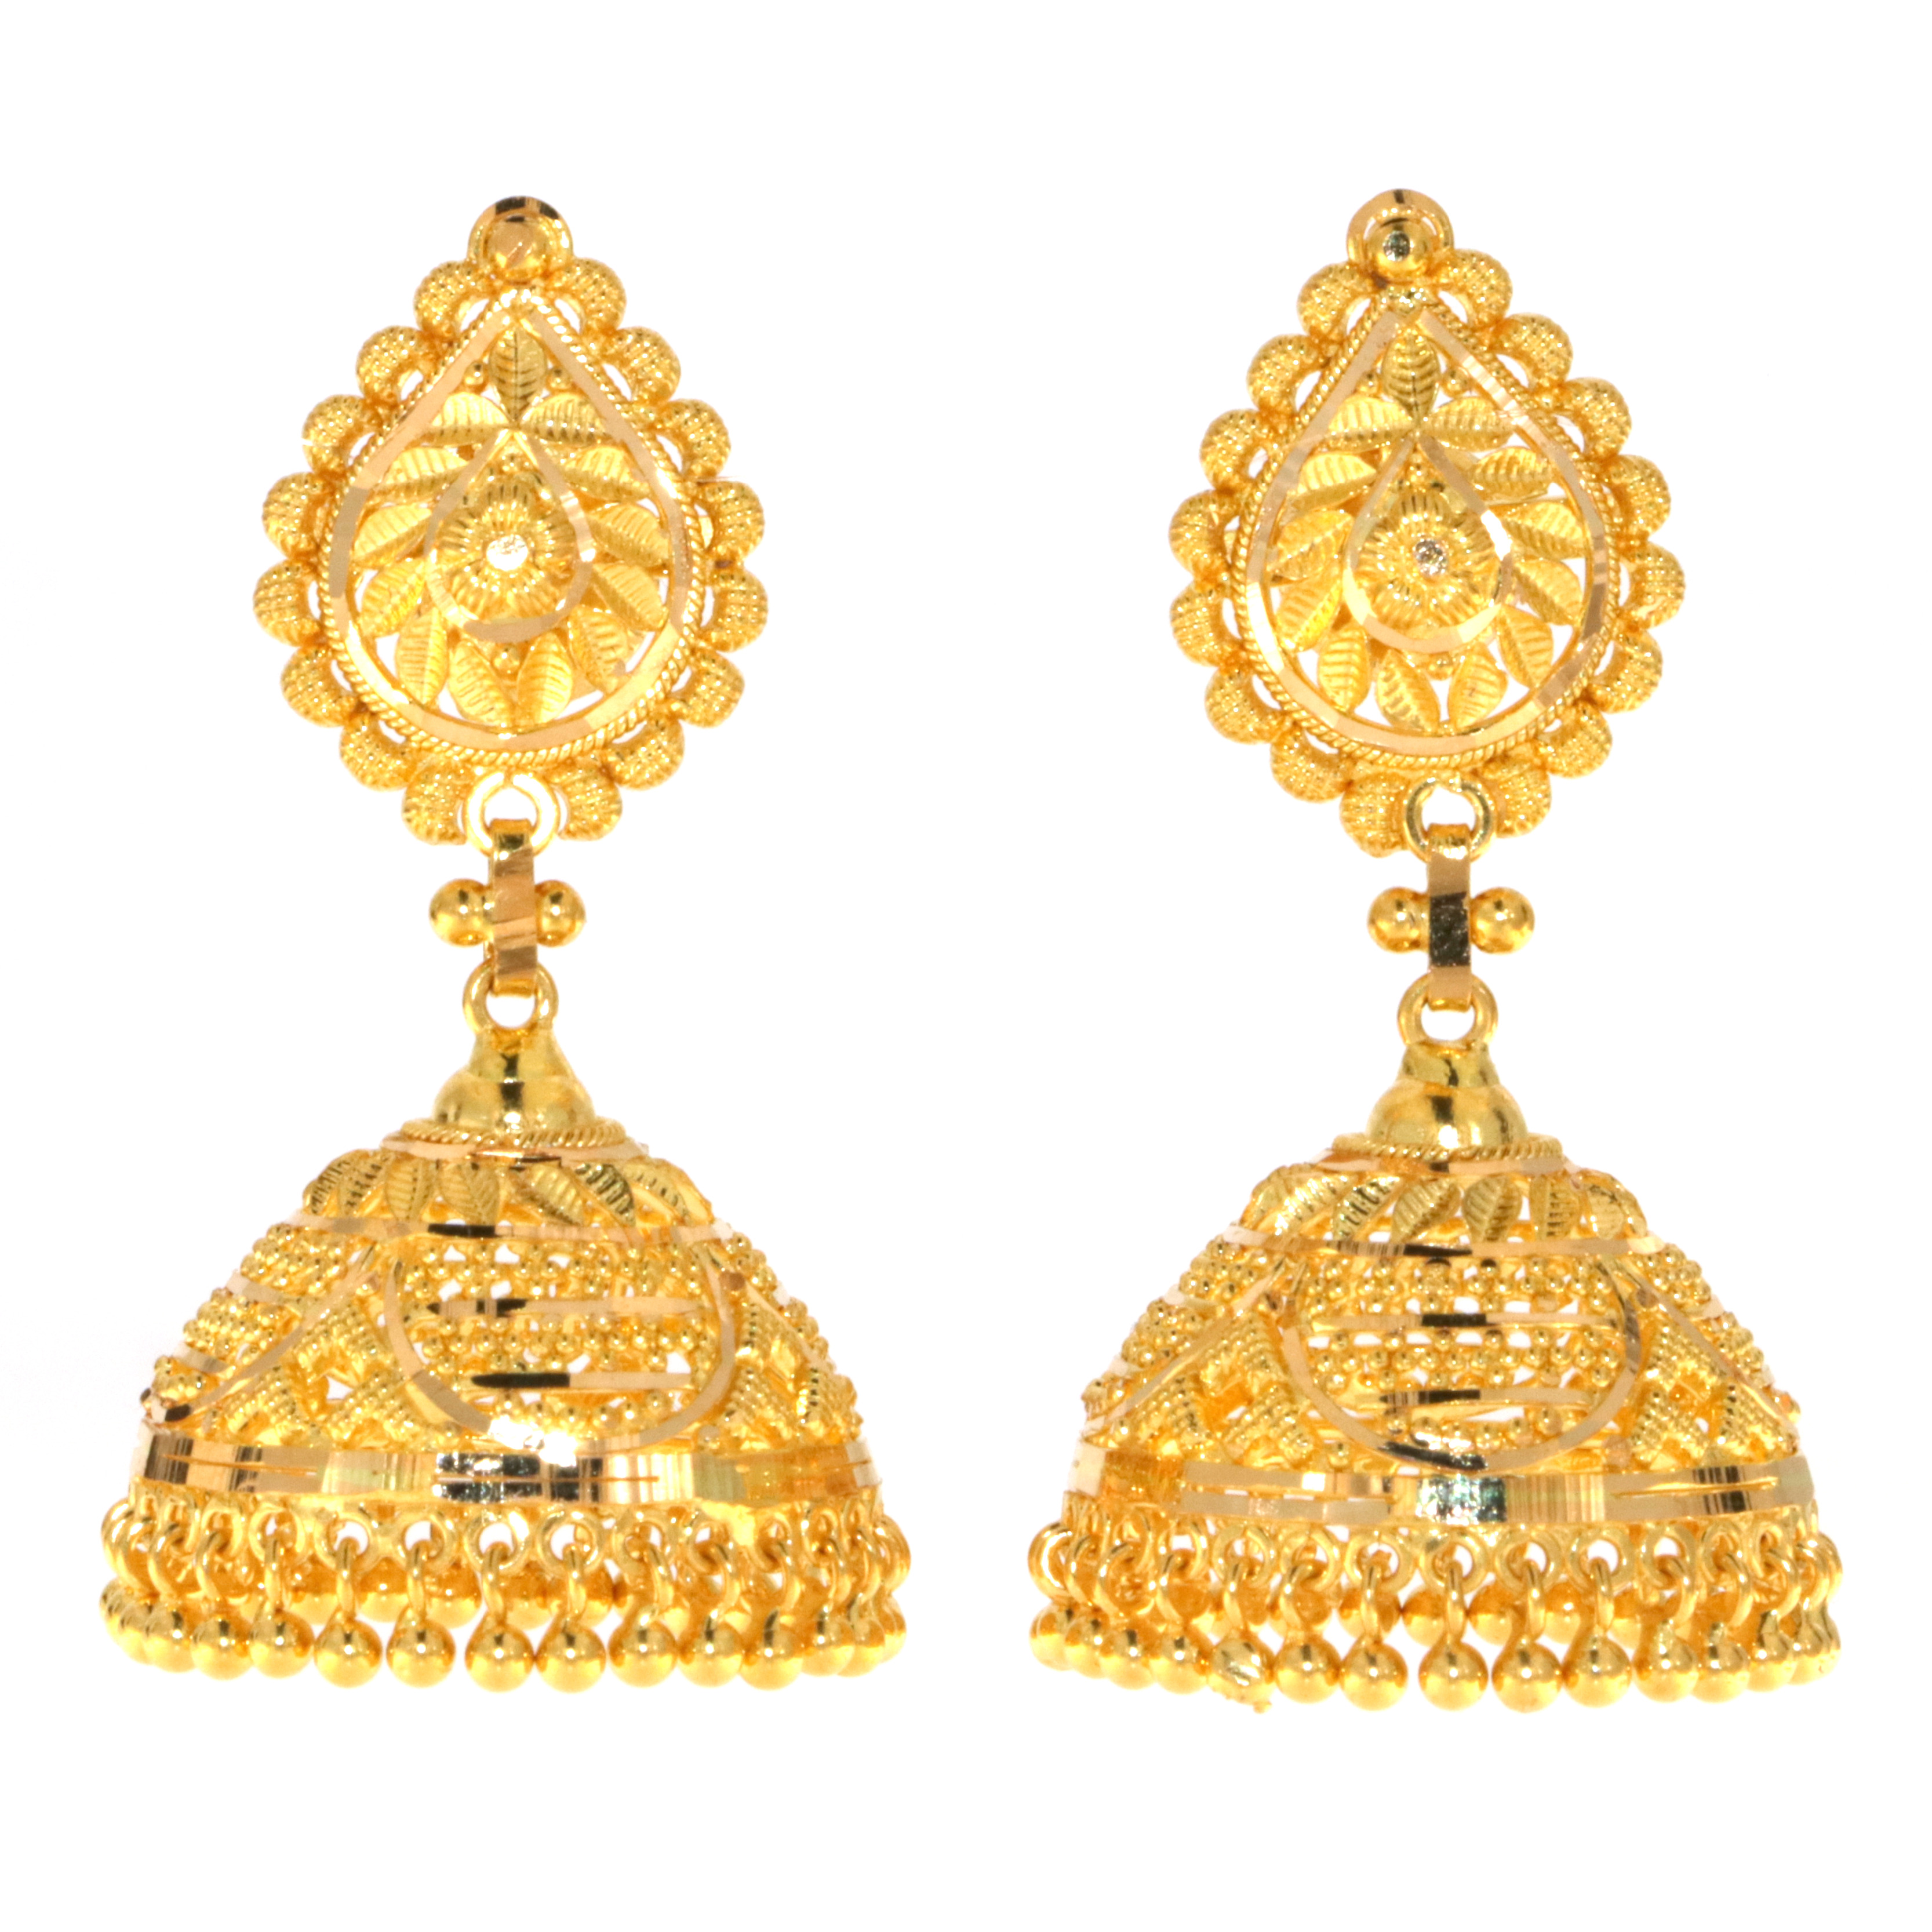 22ct Real Gold Asian/Indian/Pakistani Style Earrings Jhumkay